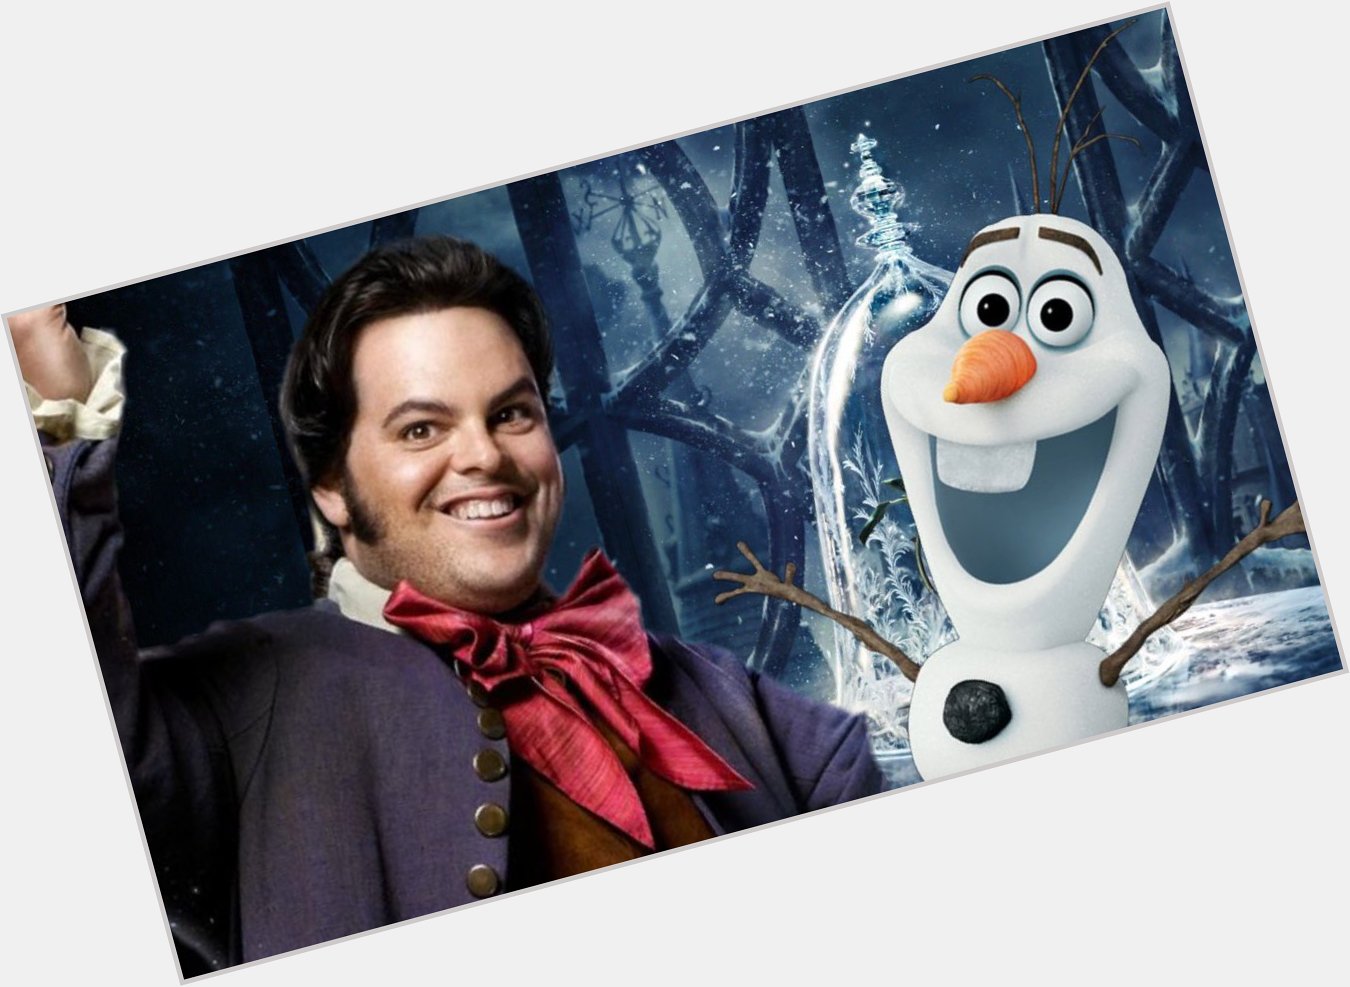 Happy birthday to the voice of Olaf and our new Lefou, the hilarious Josh Gad. 